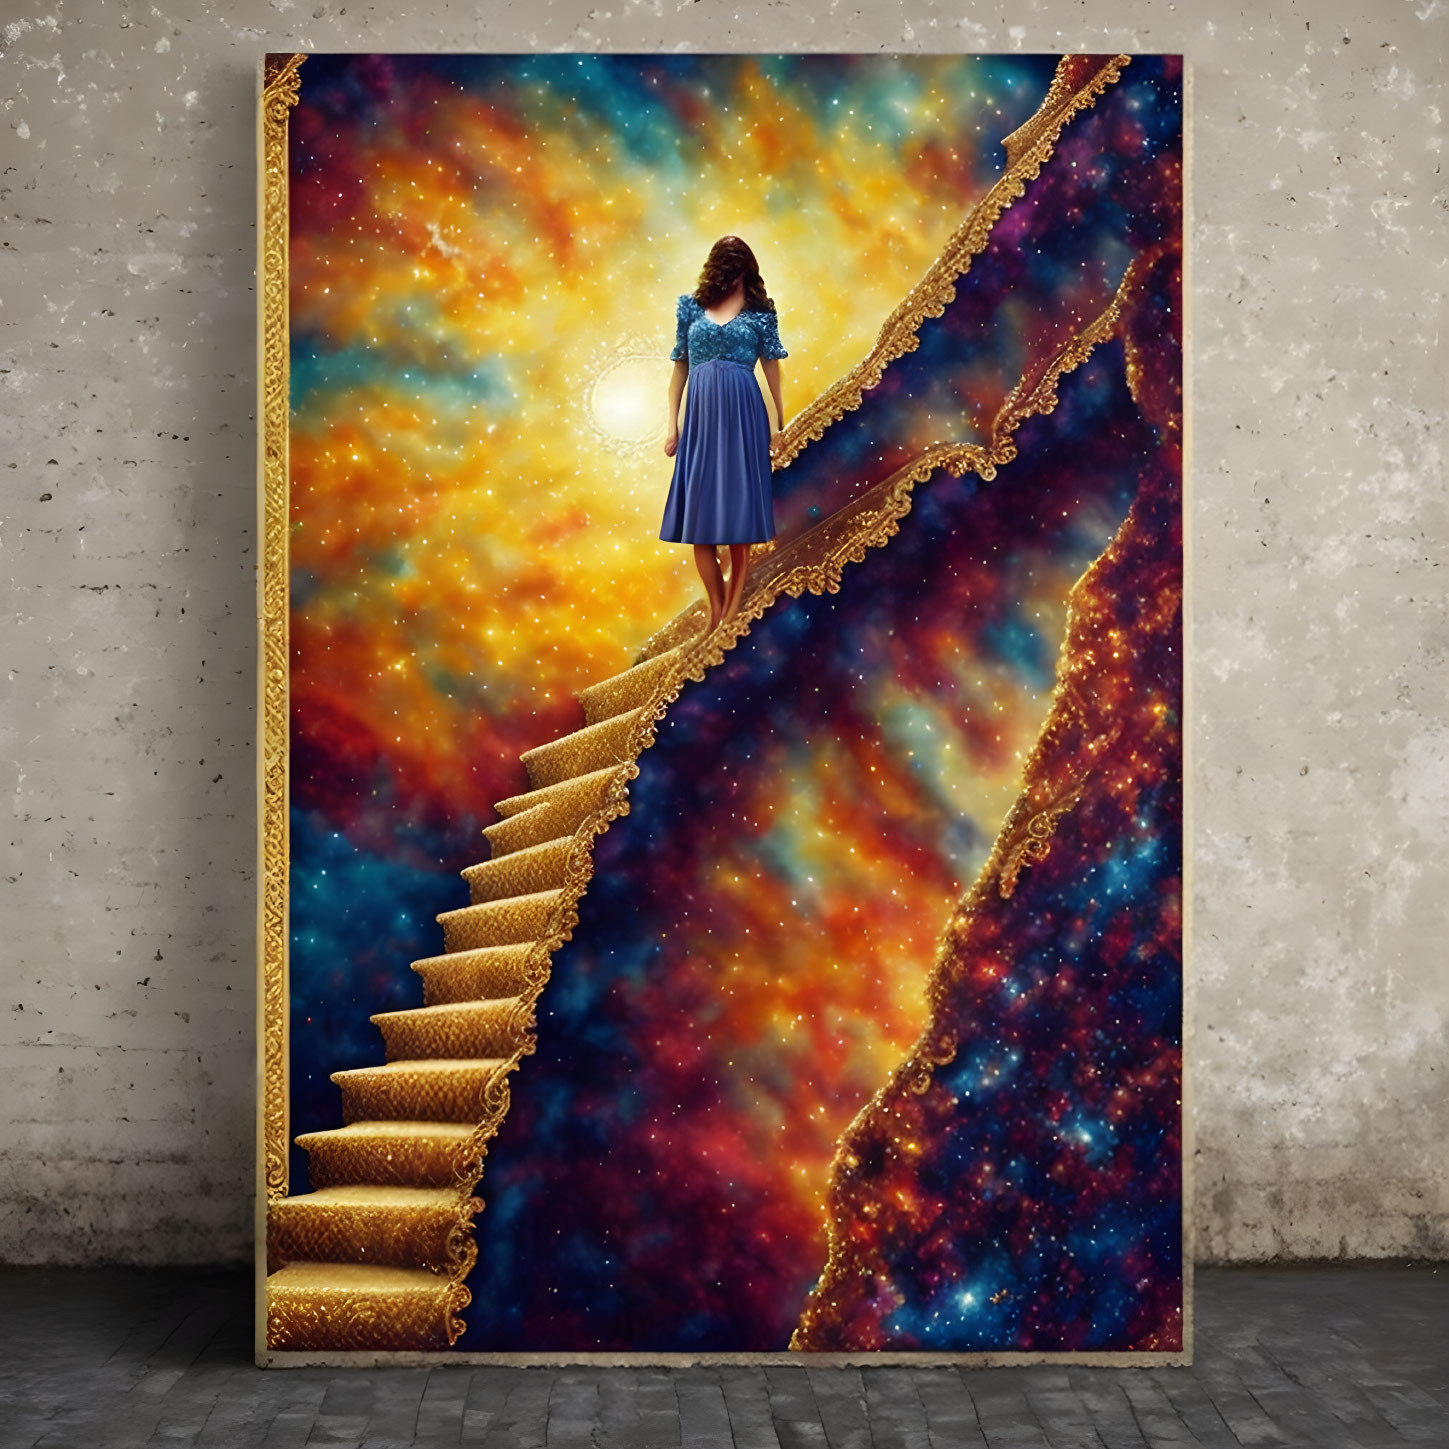 Woman in Blue Dress Climbing Golden Spiral Staircase in Cosmic Sky